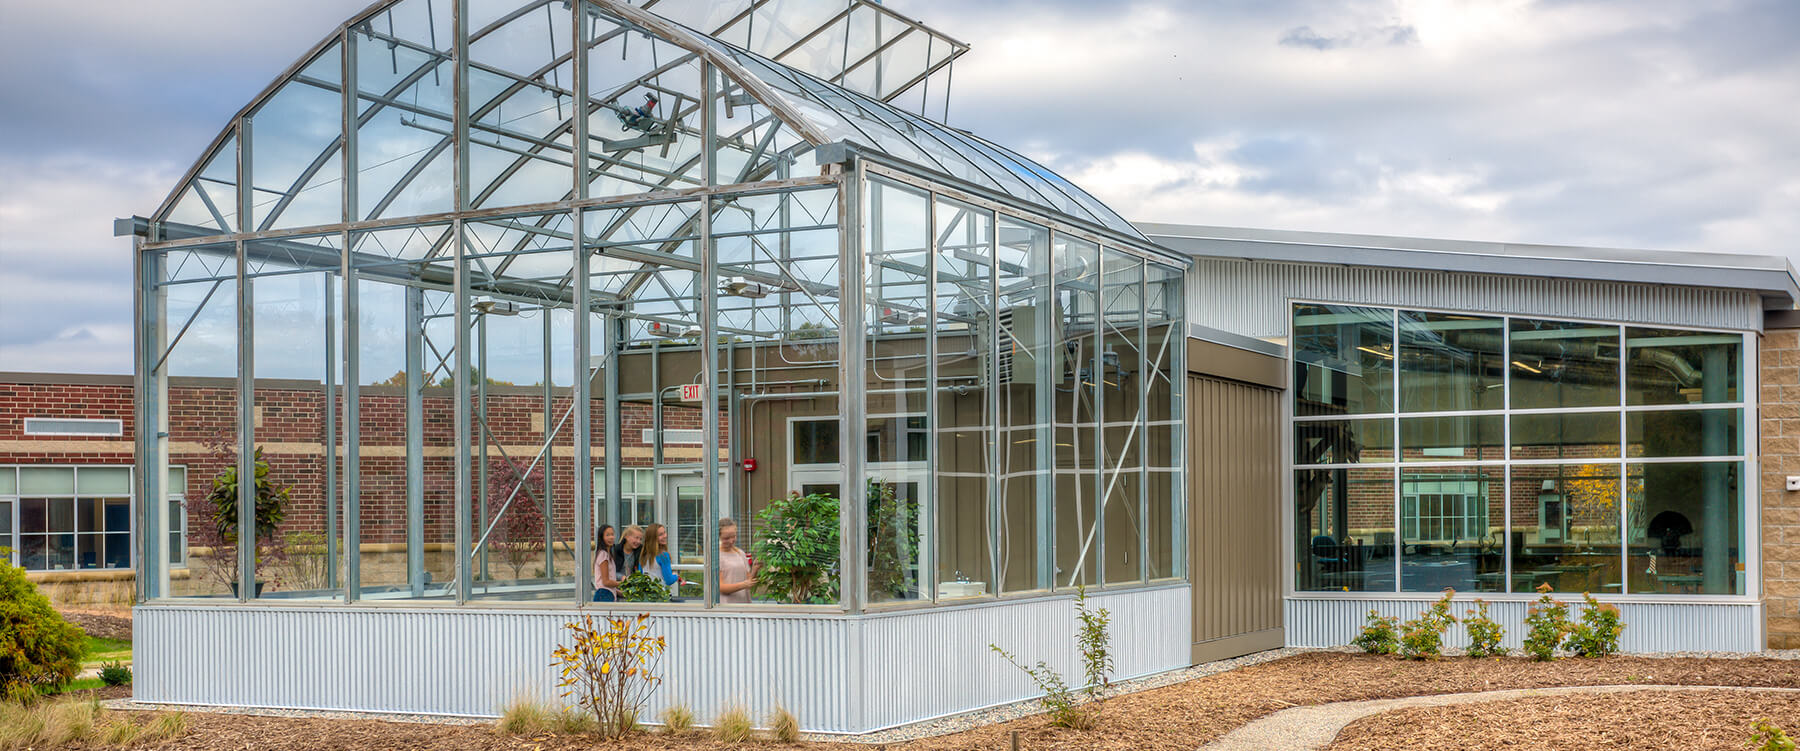 Ada Christian Integrated Outdoor Education greenhouse exterior